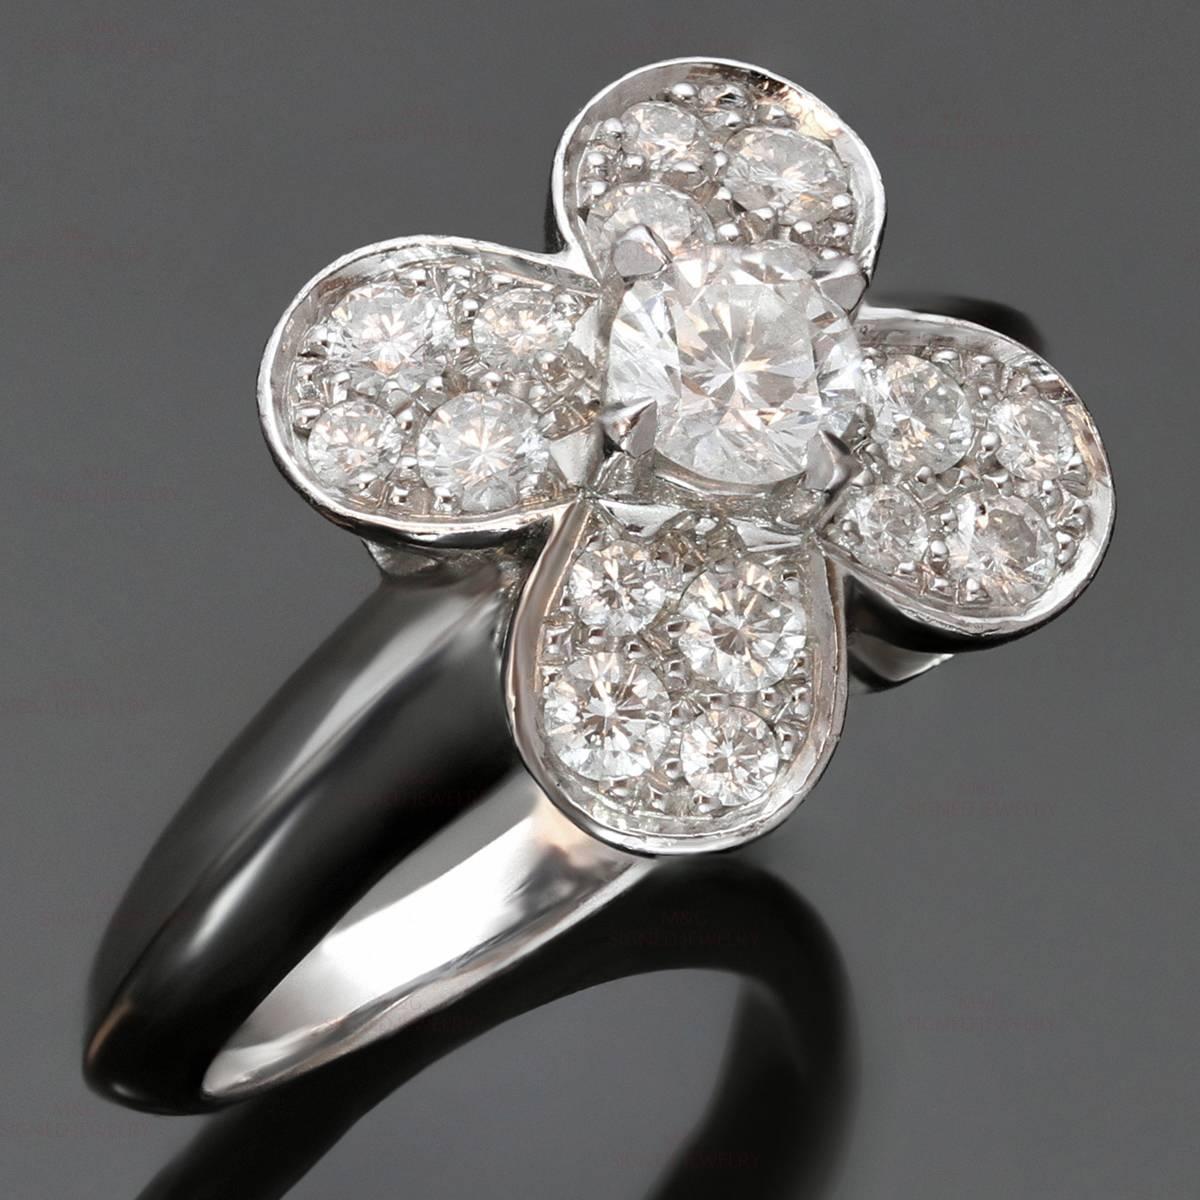 This stunning Van Cleefs & Arpels ring from the classic Trefle collection is made in 18k white gold and features a clover motif set with brilliant-cut round diamonds of an estimated 0.75 carats. Made in France circa 2010s. Measurements: